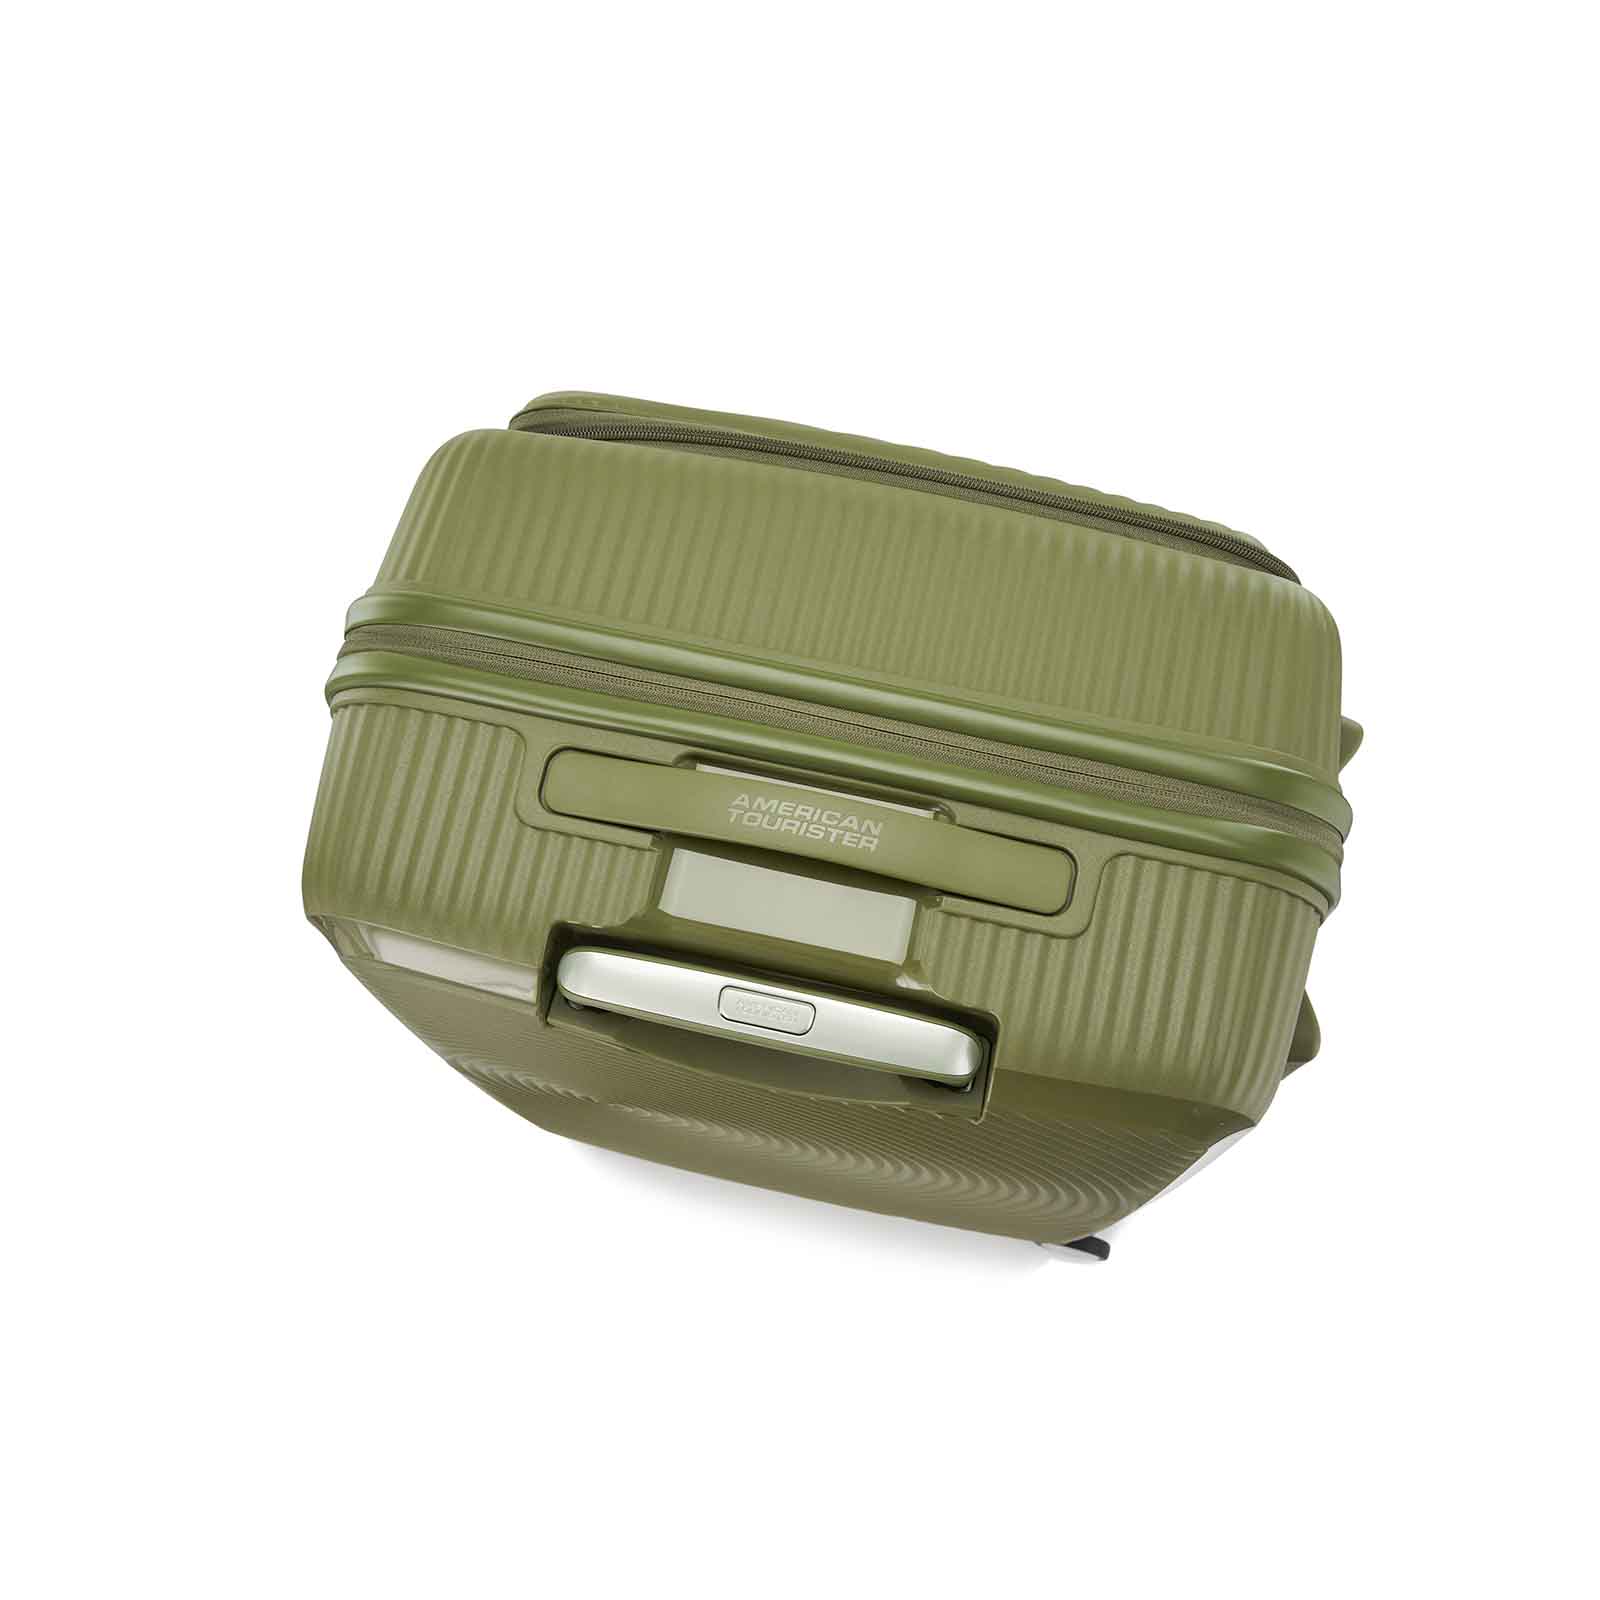 American-Tourister-Curio-Book-Opening-55cm-Carry-On-Suitcase-Khaki-Handle